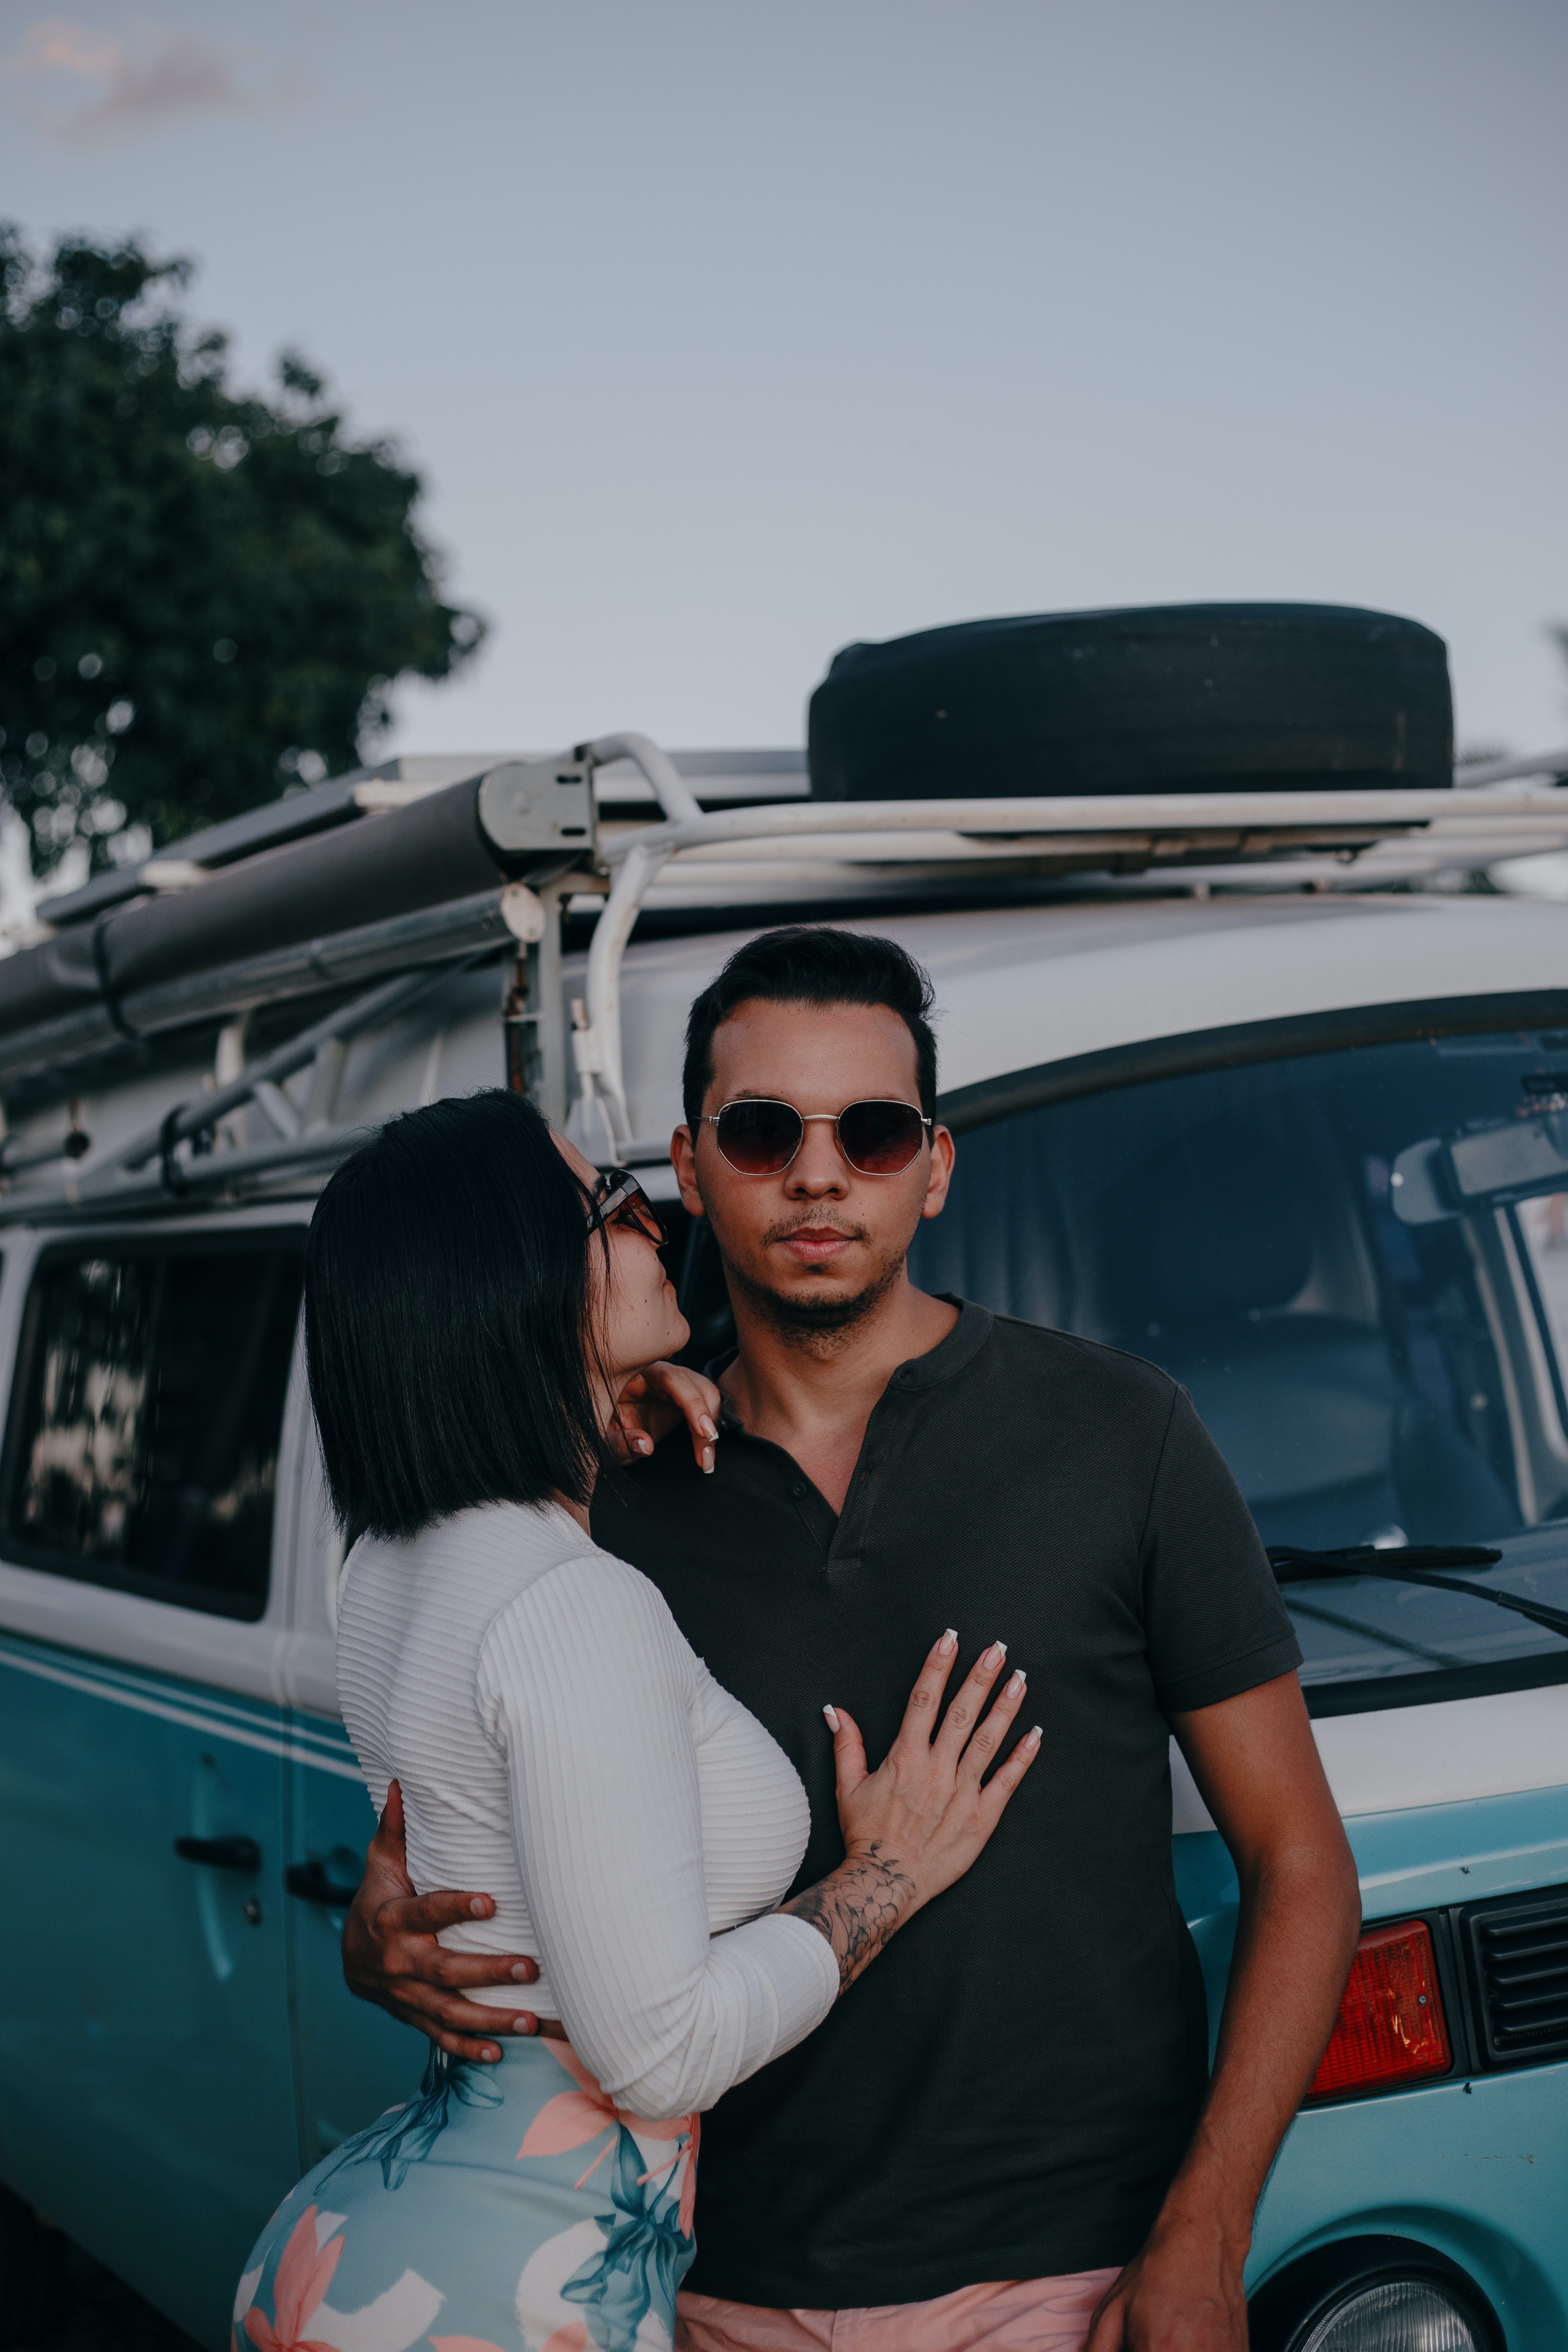 A couple leaning on a van. | Source: Pexels